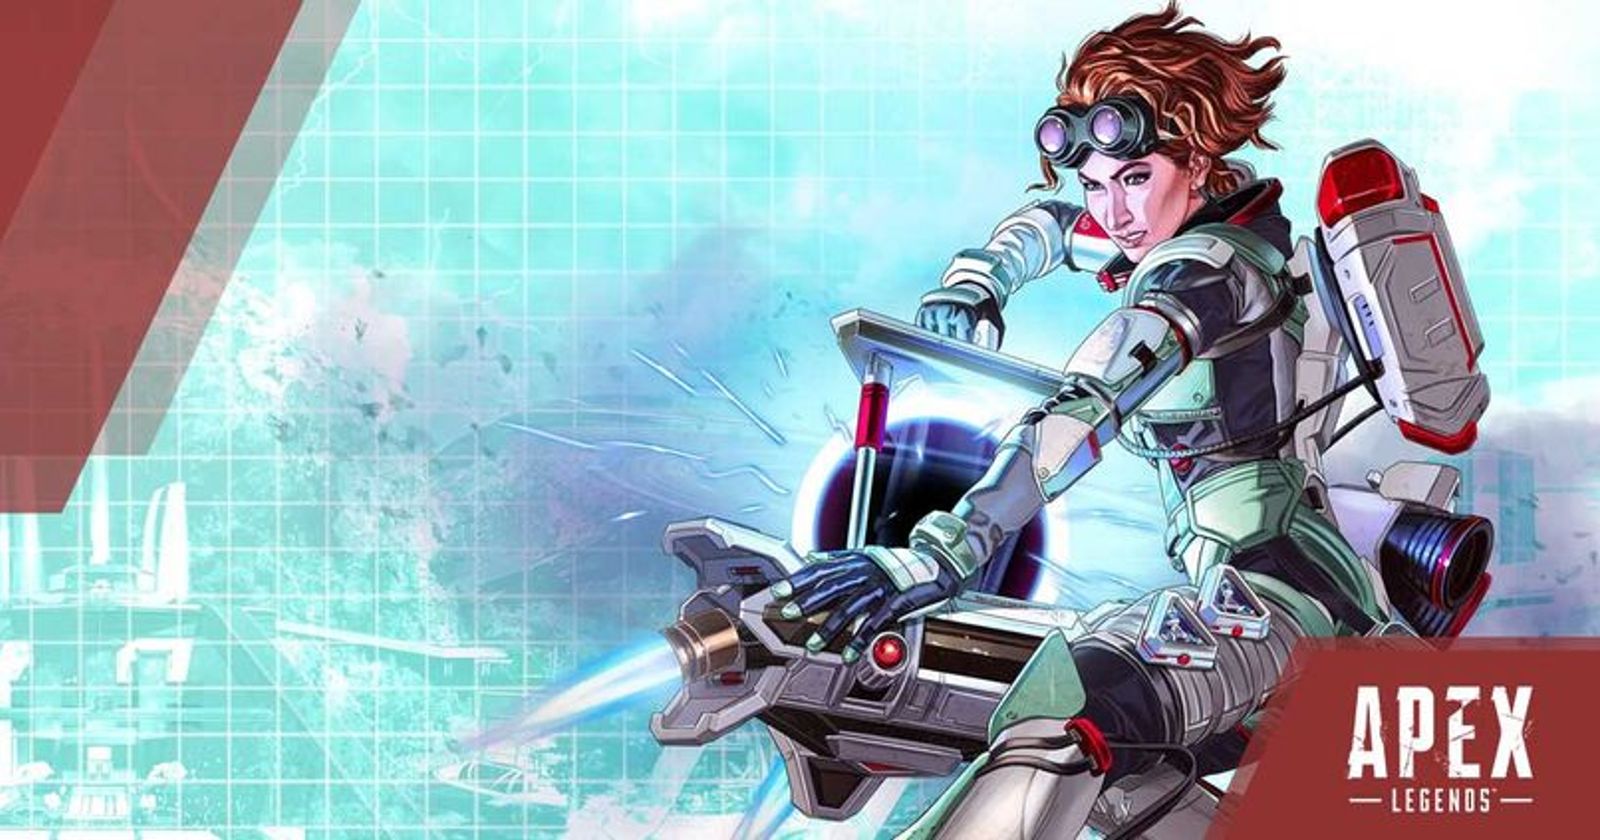 Apex Legends' New Character Is The Scientist Wattson - Game Informer